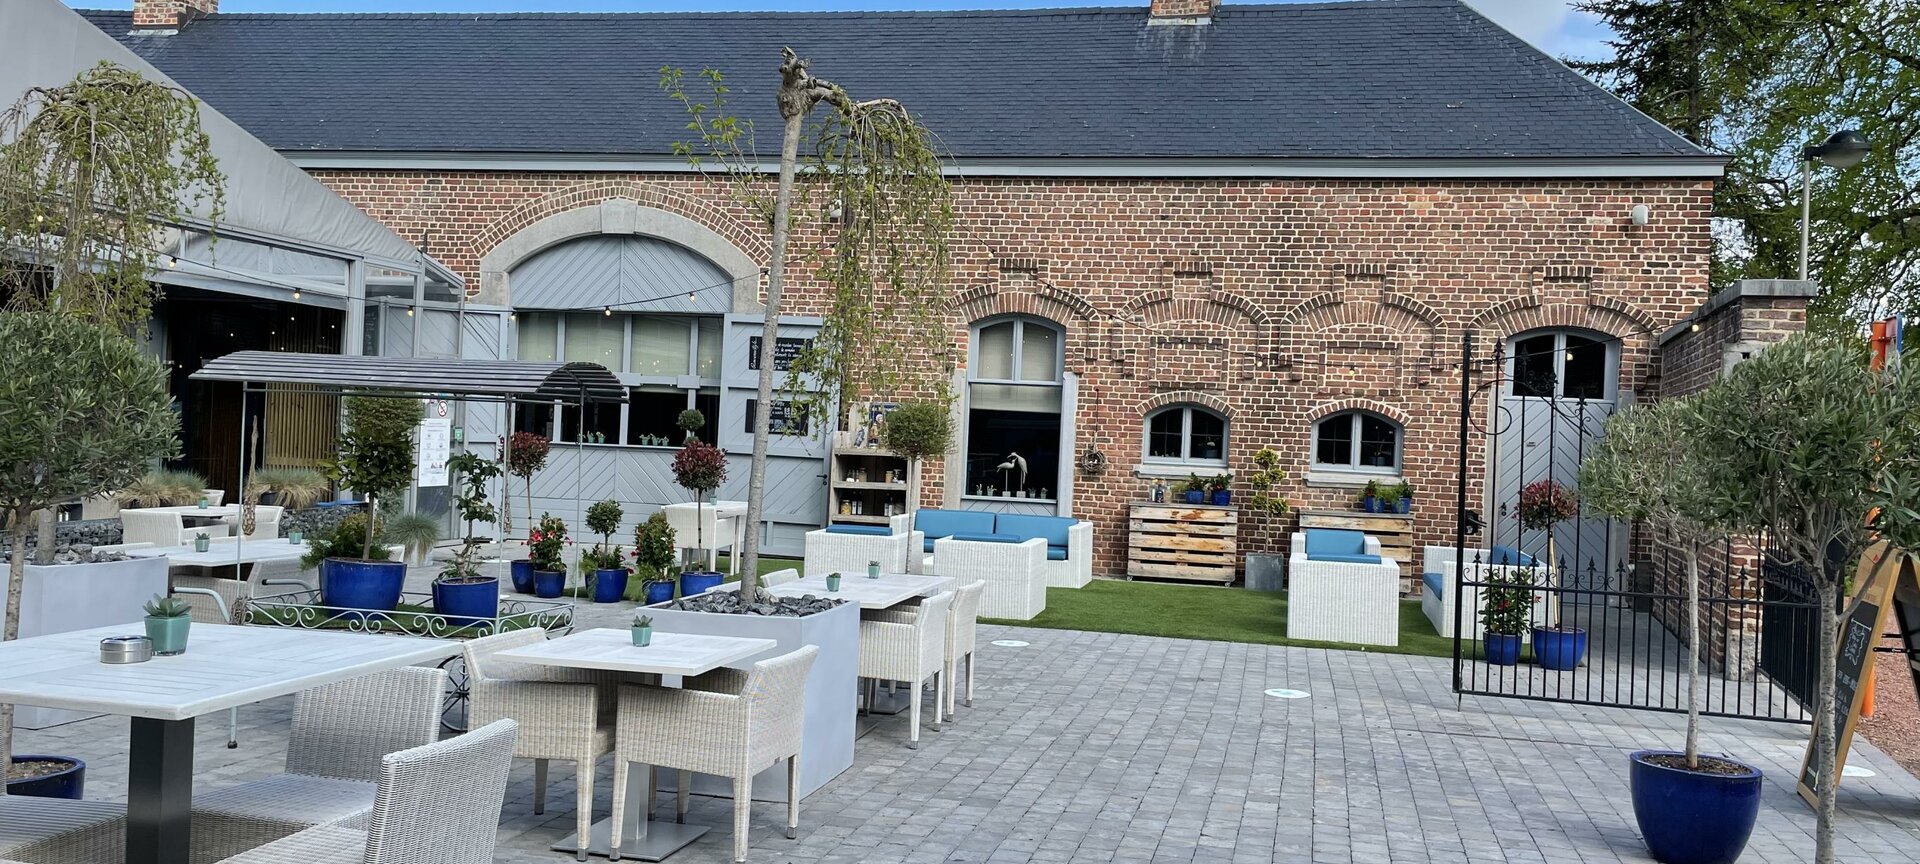 Brasserie-Restaurant Remise New Style - Loungy terras